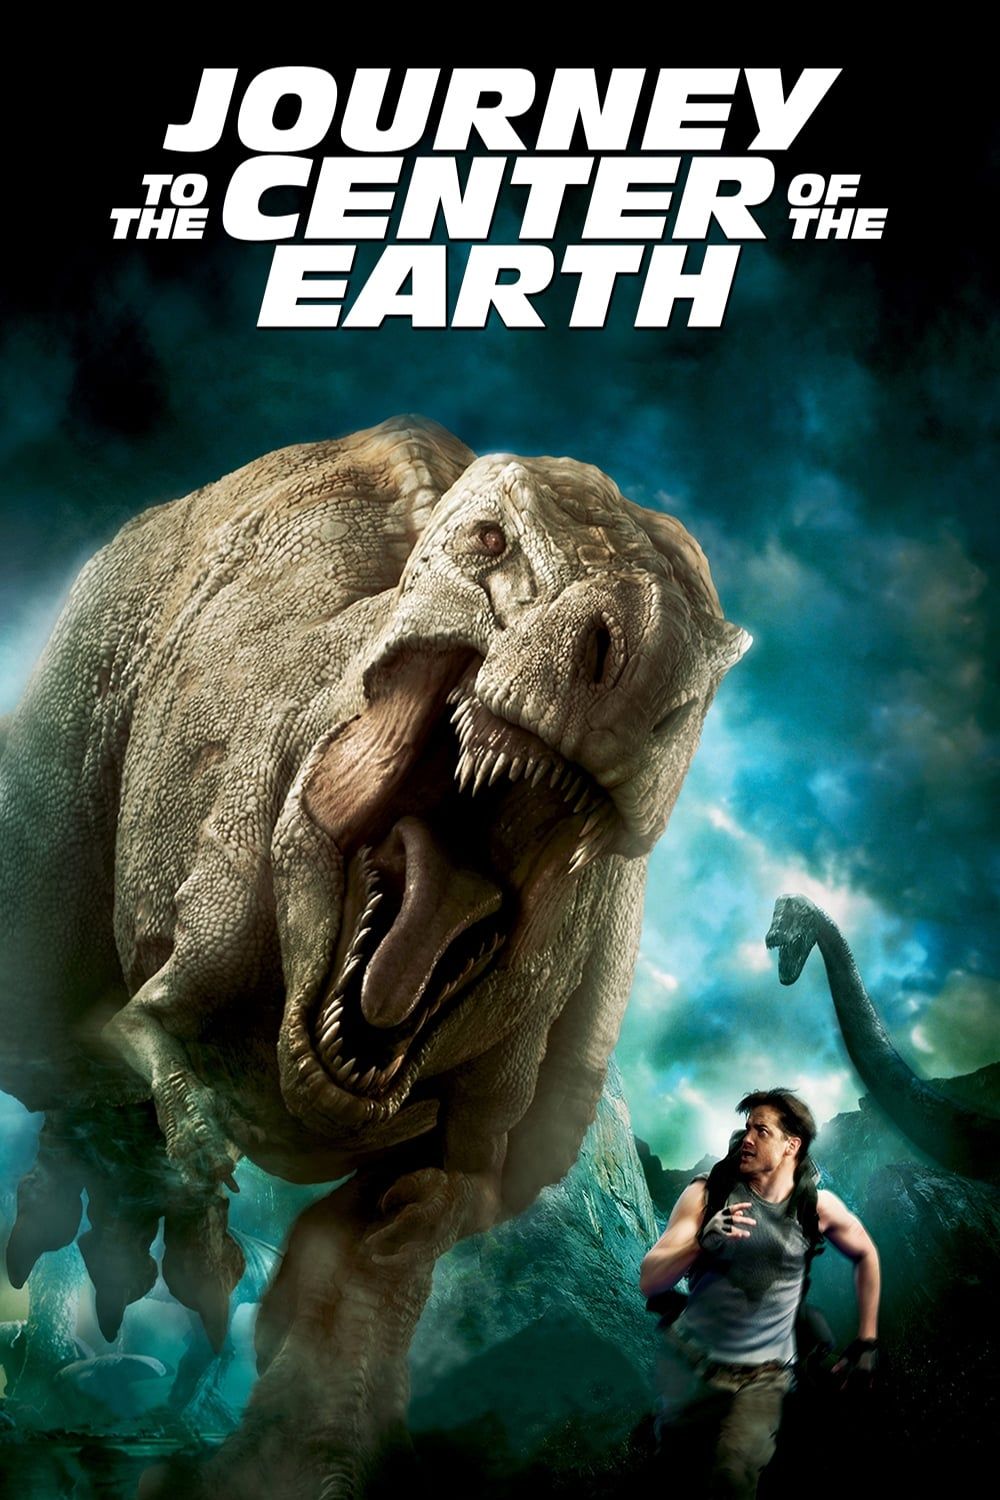 Brendan Fraser as Trev running from a dinosaur on the movie poster for Journey to the Center of the Earth (2008)